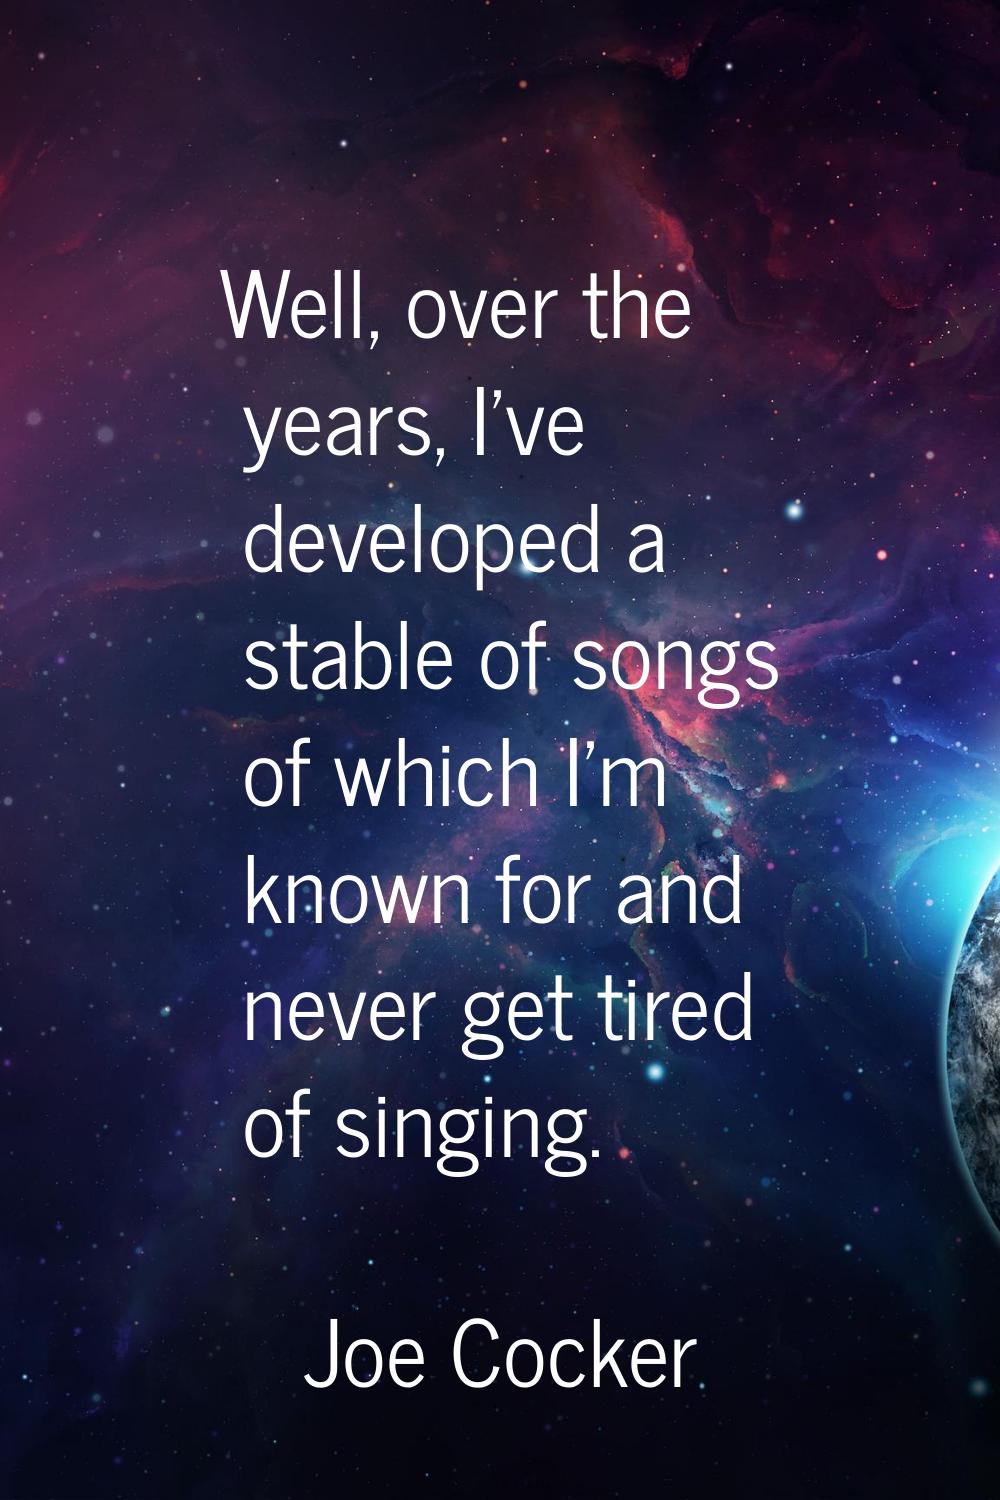 Well, over the years, I've developed a stable of songs of which I'm known for and never get tired o